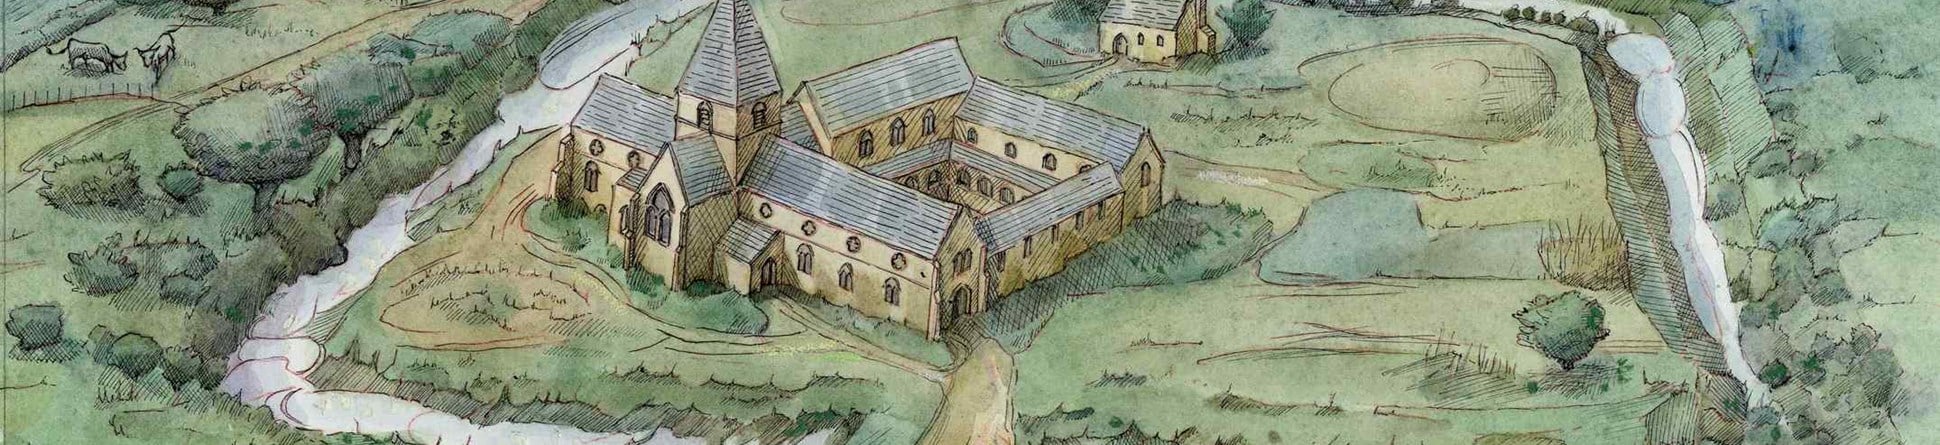 Artist's impression of the priory in the 14th century, with a fair in progress.